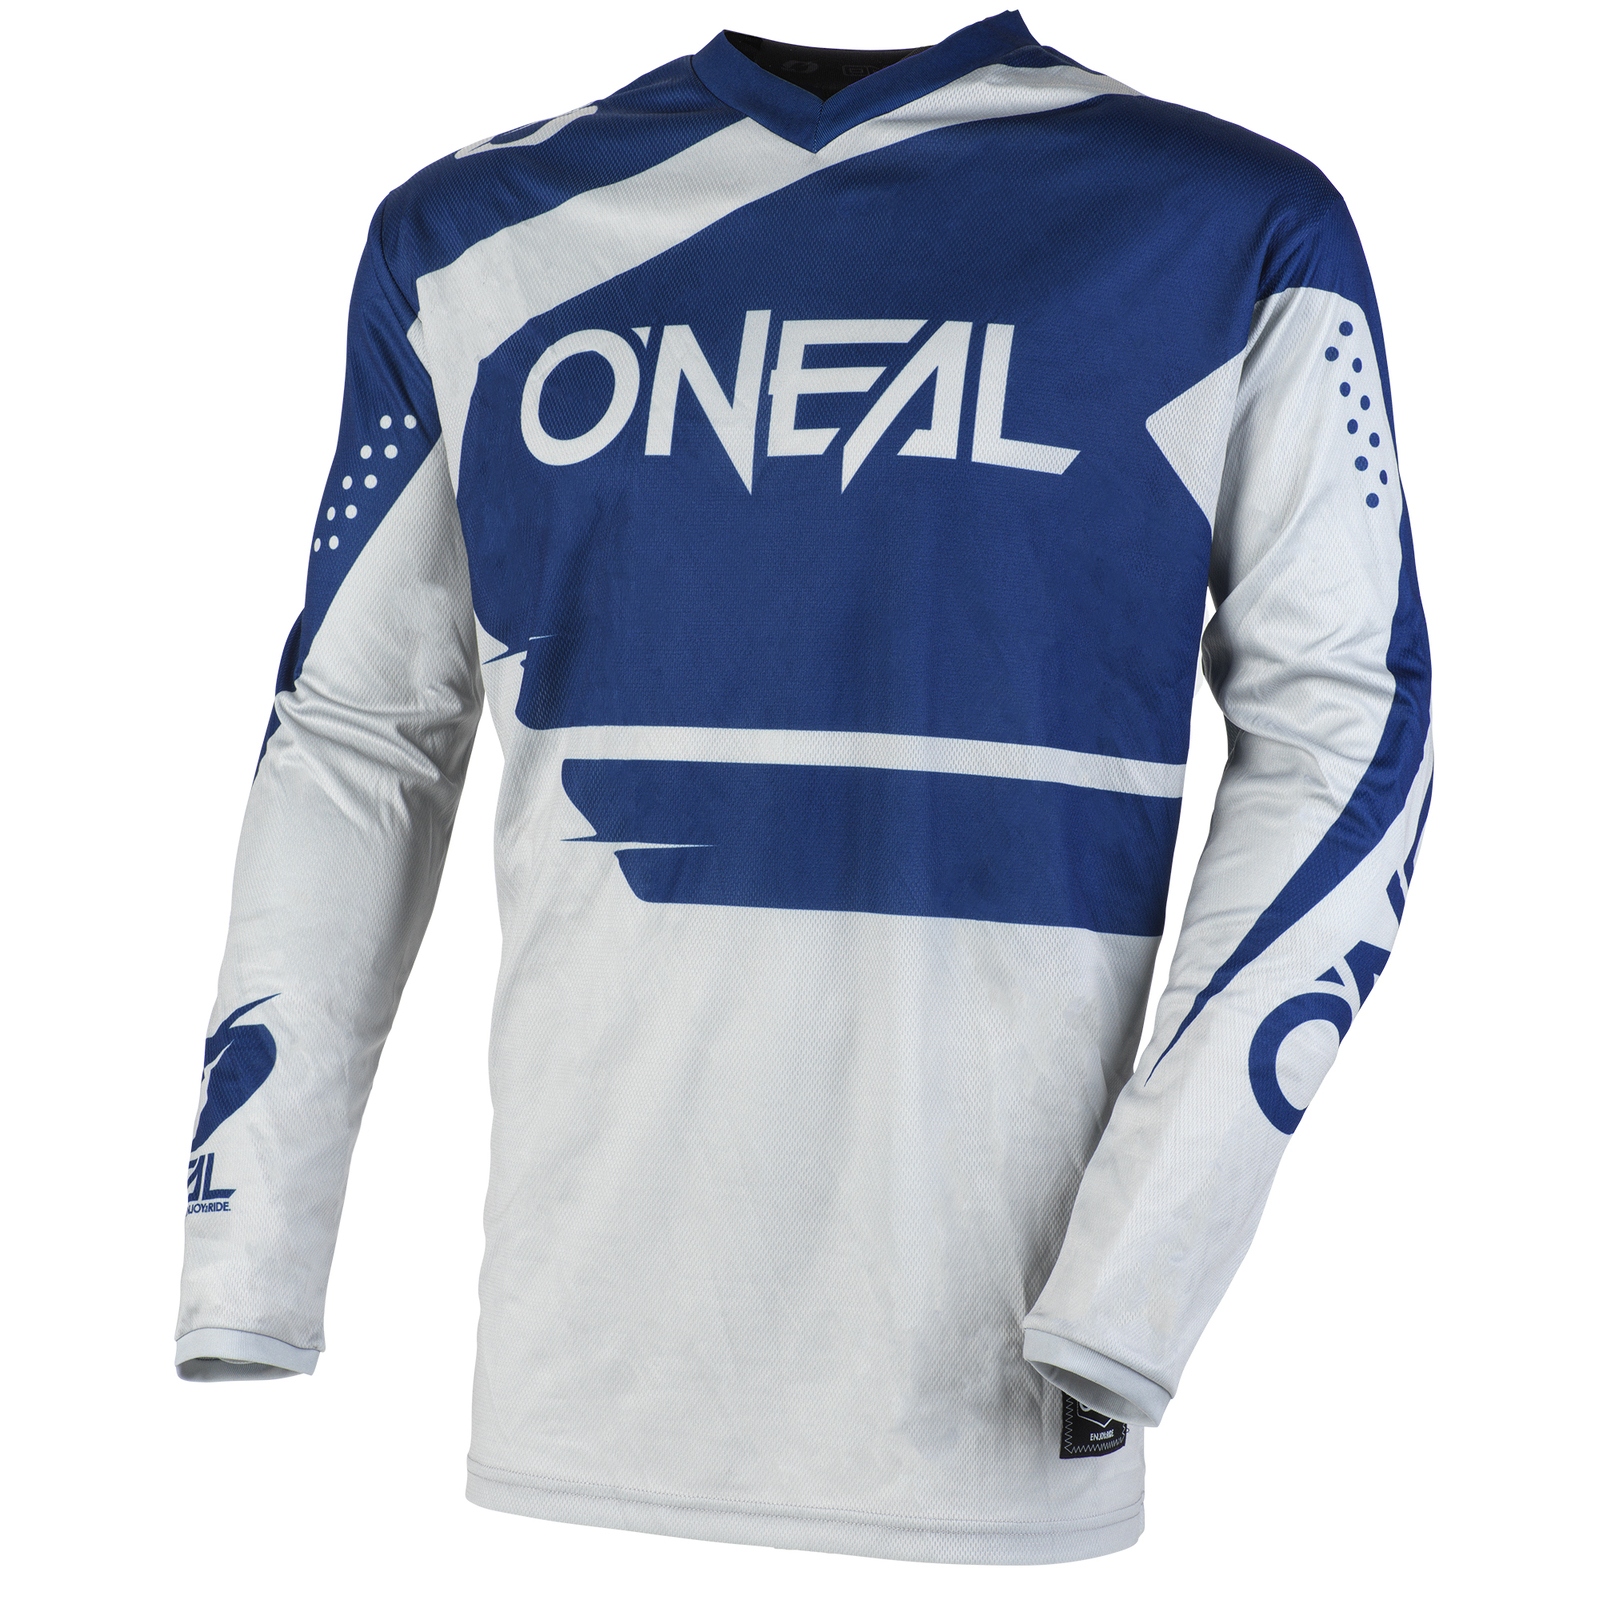 blue and grey jersey